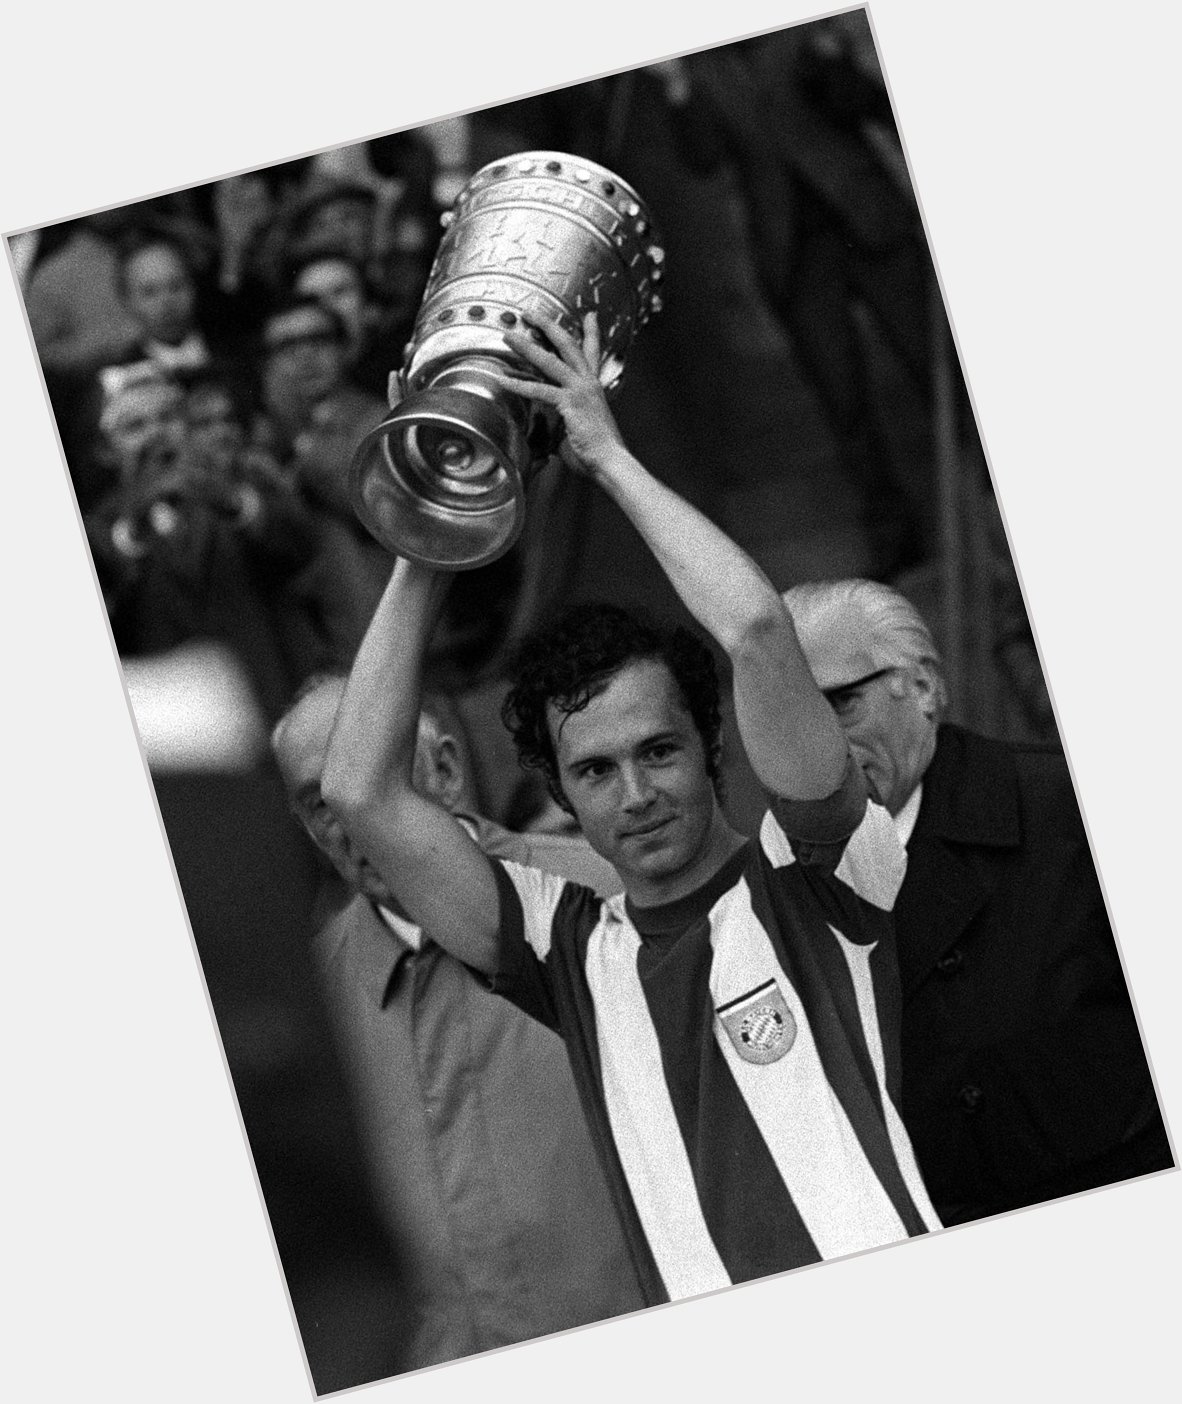 FCBayernEN: DFBPokal_EN: A 4  -time winner with FCBayernEN - happy birthday, Franz beckenbauer!  